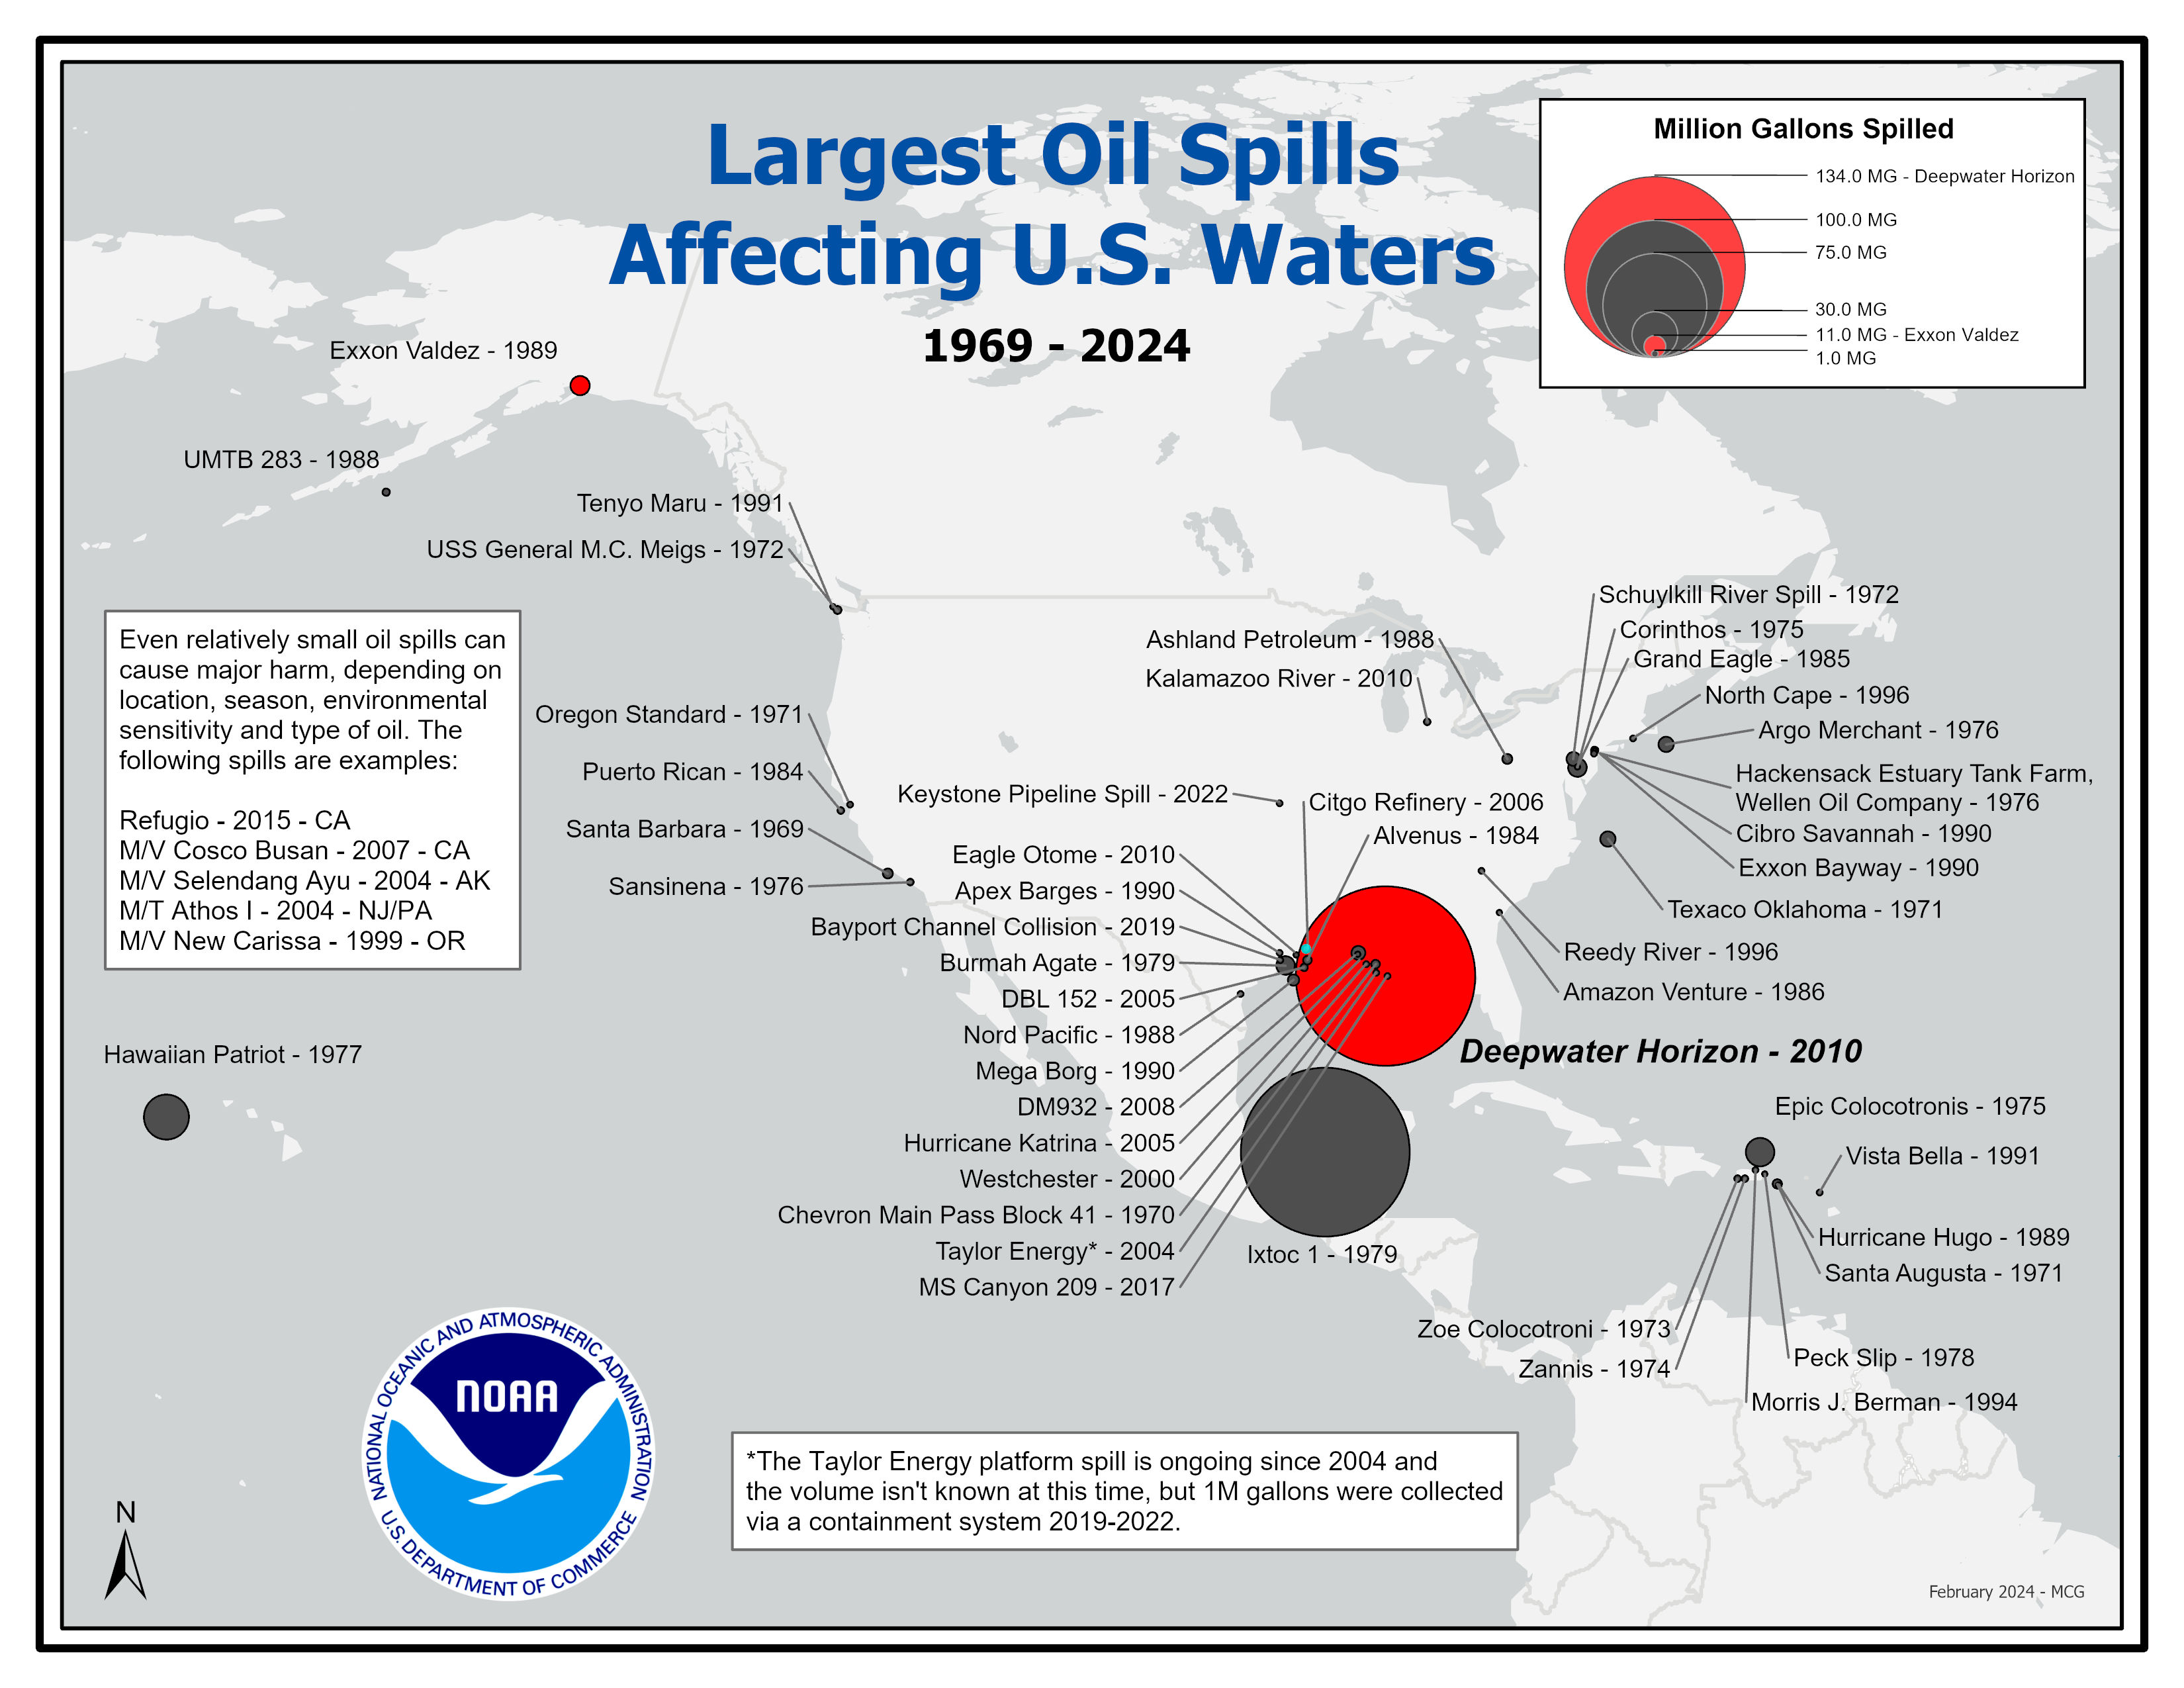 A map showing the Largest Oil Spills Affecting U.S. Waters from 1969 - present. 44 oil spills are shown, affecting coastal waters in Alaska, down the West Coast, the Gulf of Mexico and Caribbean, the East Coast, and the Great Lakes. More information can be found at https://response.restoration.noaa.gov/oil-and-chemical-spills/oil-spills/largest-oil-spills-affecting-us-waters-1969.html.